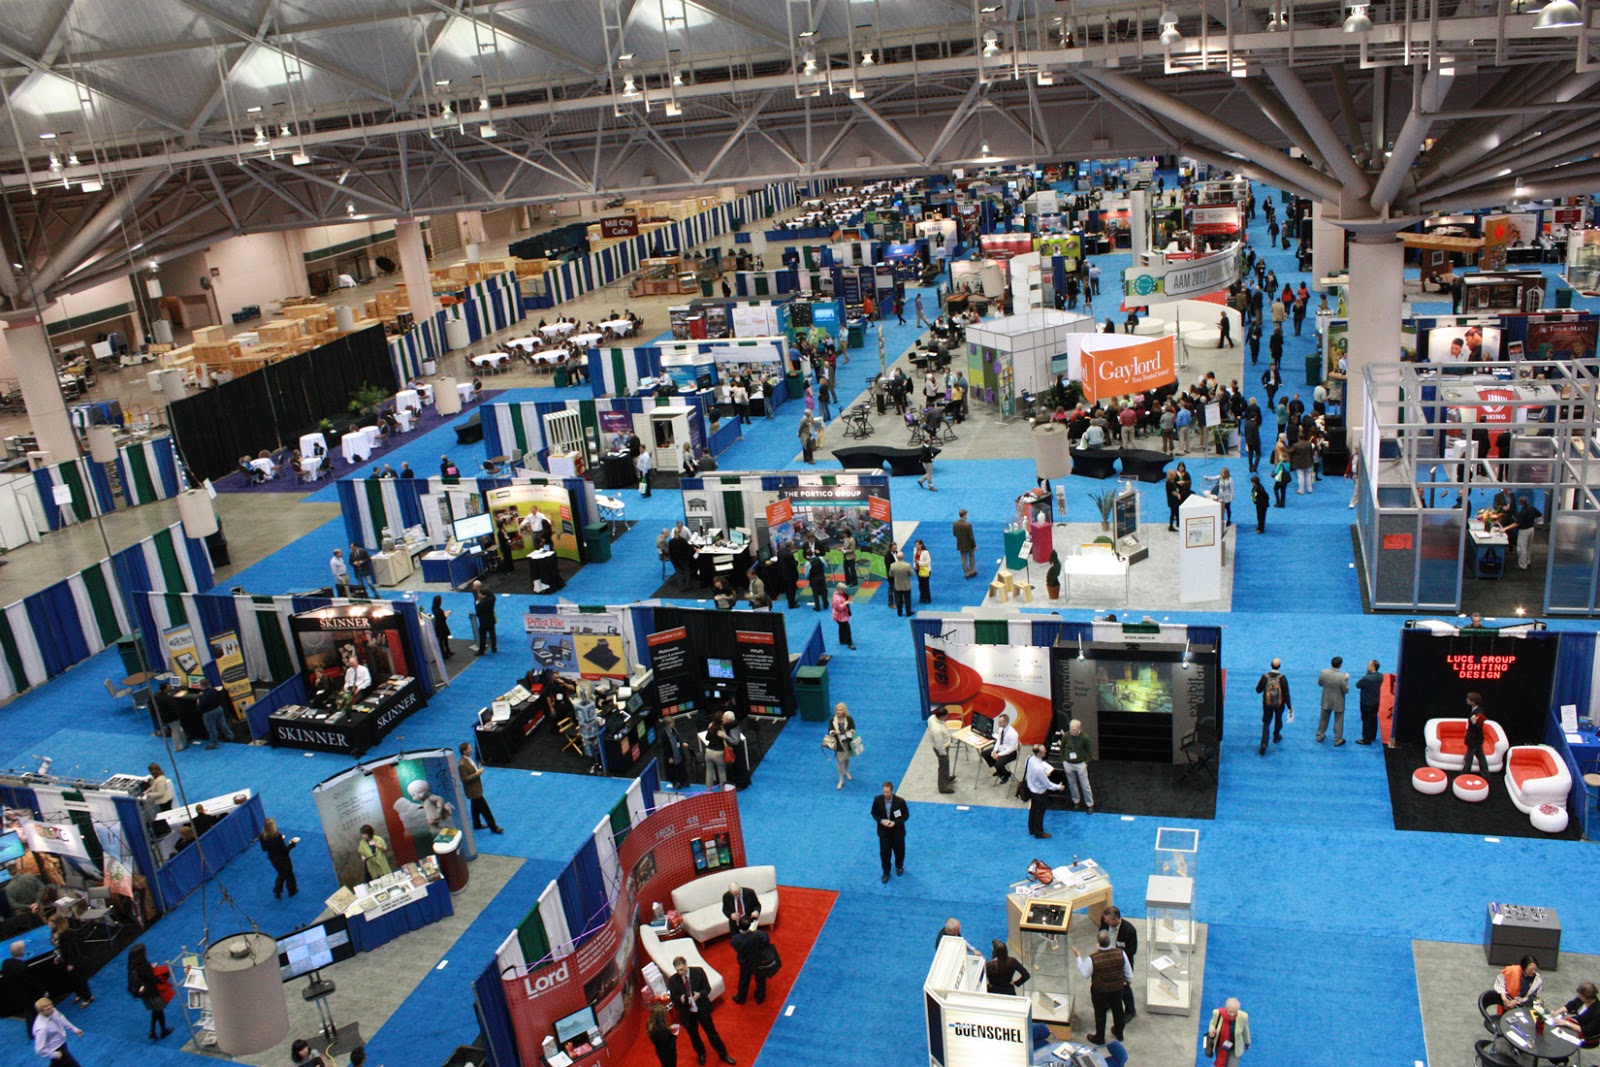 Image: an aerial shot of the MuseumExpo showfloor with many exhibitor booths arranged in a grid